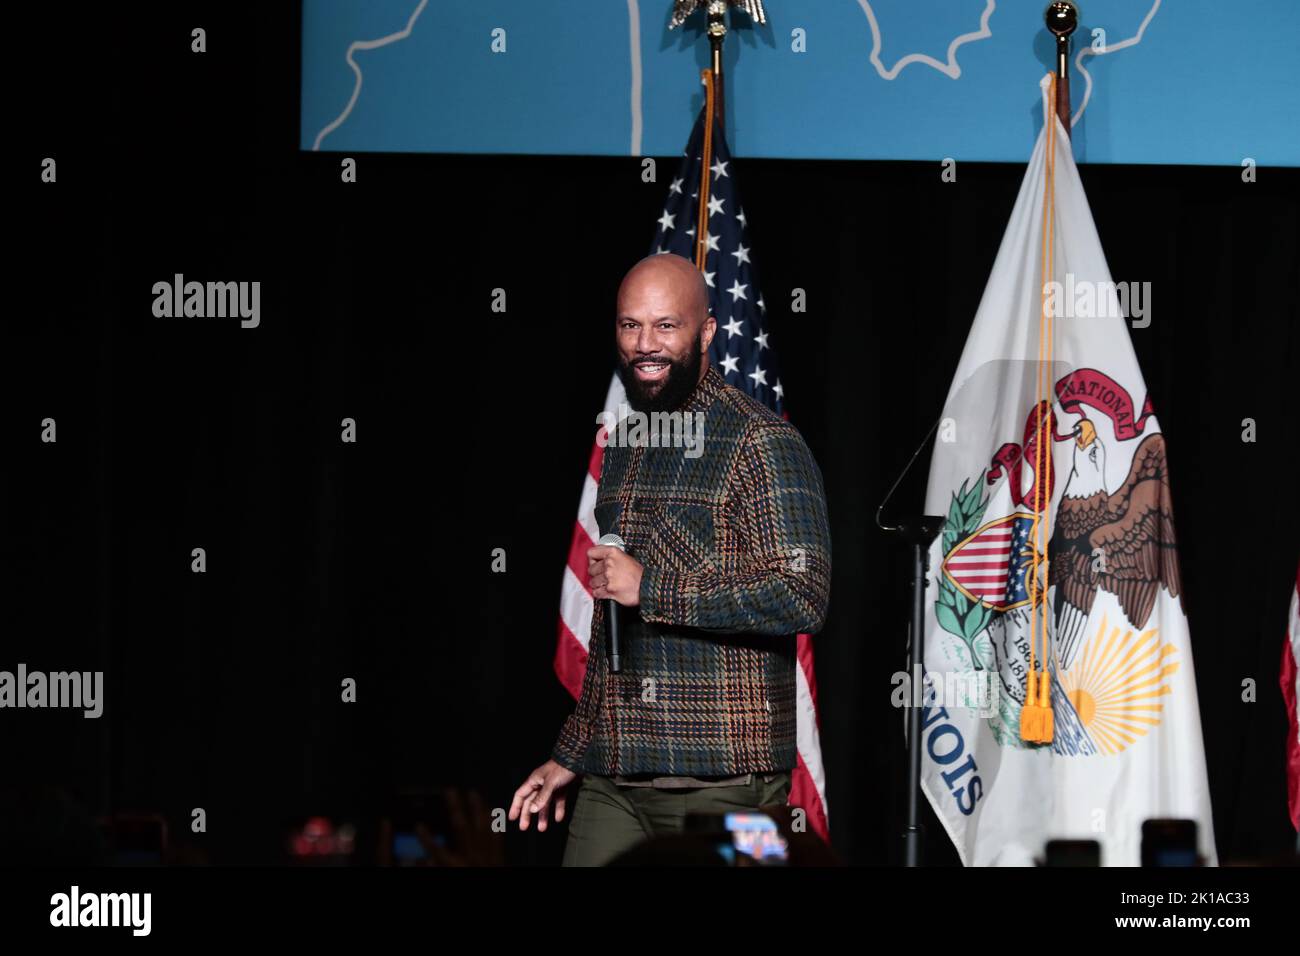 Chicago, USA. 16th Sep, 2022. American rapper and actor Lonnie Rashid Lynn, known by his stage name Common, participates in a political event with Governor JB Pritzker at the University of Illinois, in Chicago, IL, on September 16, 2022. (Photo by Mustafa Hussain/Sipa USA) Credit: Sipa USA/Alamy Live News Stock Photo